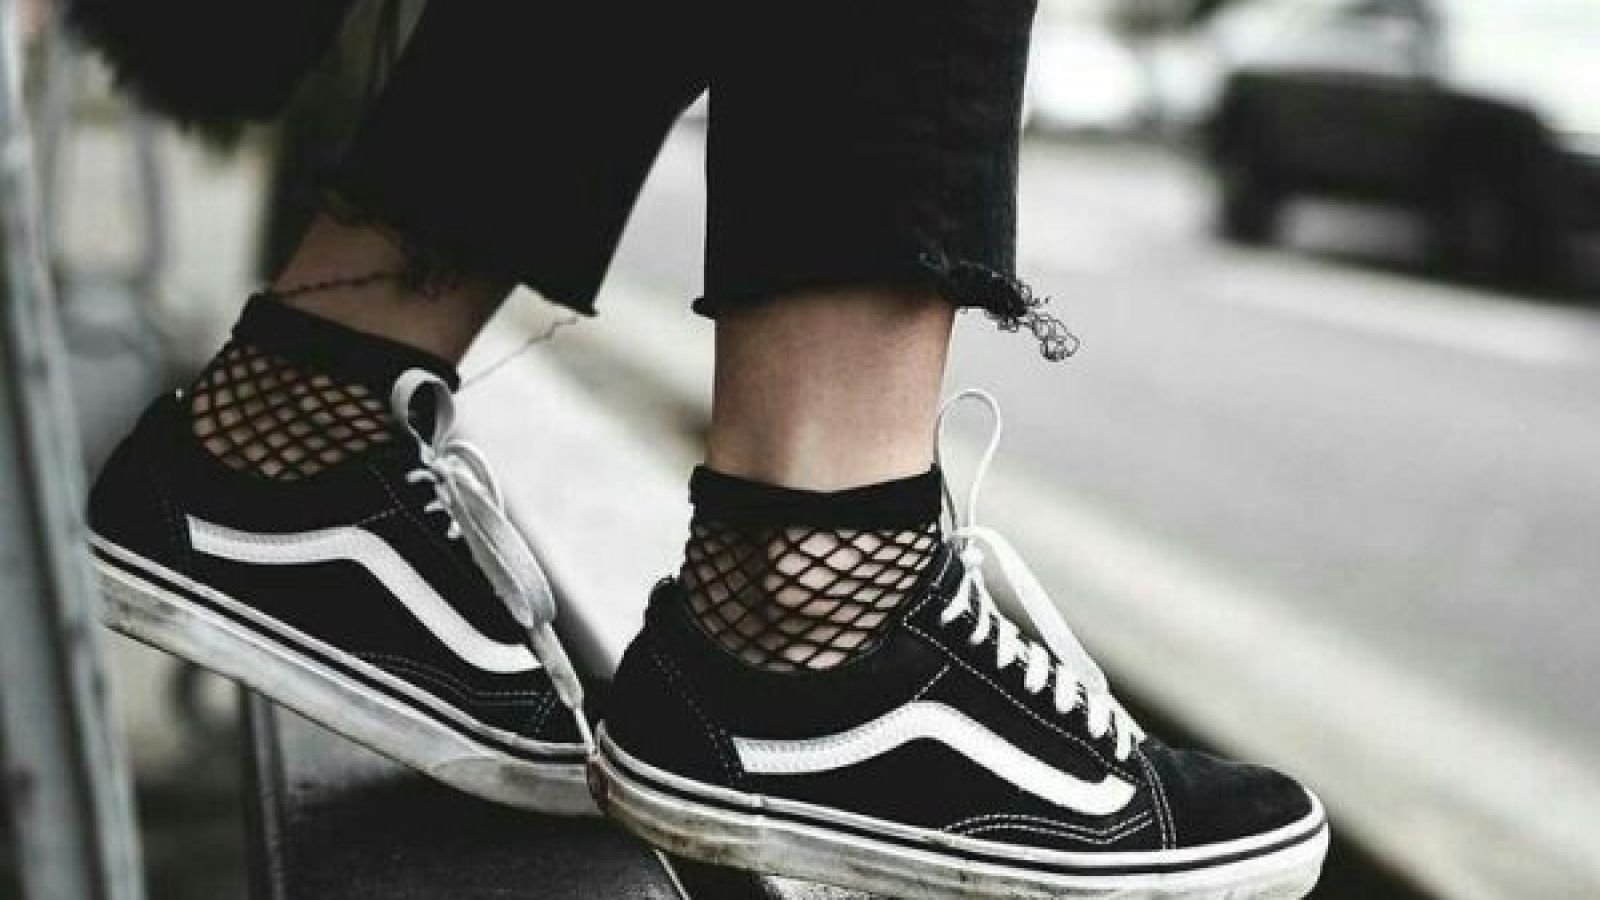 What socks to wear with vans